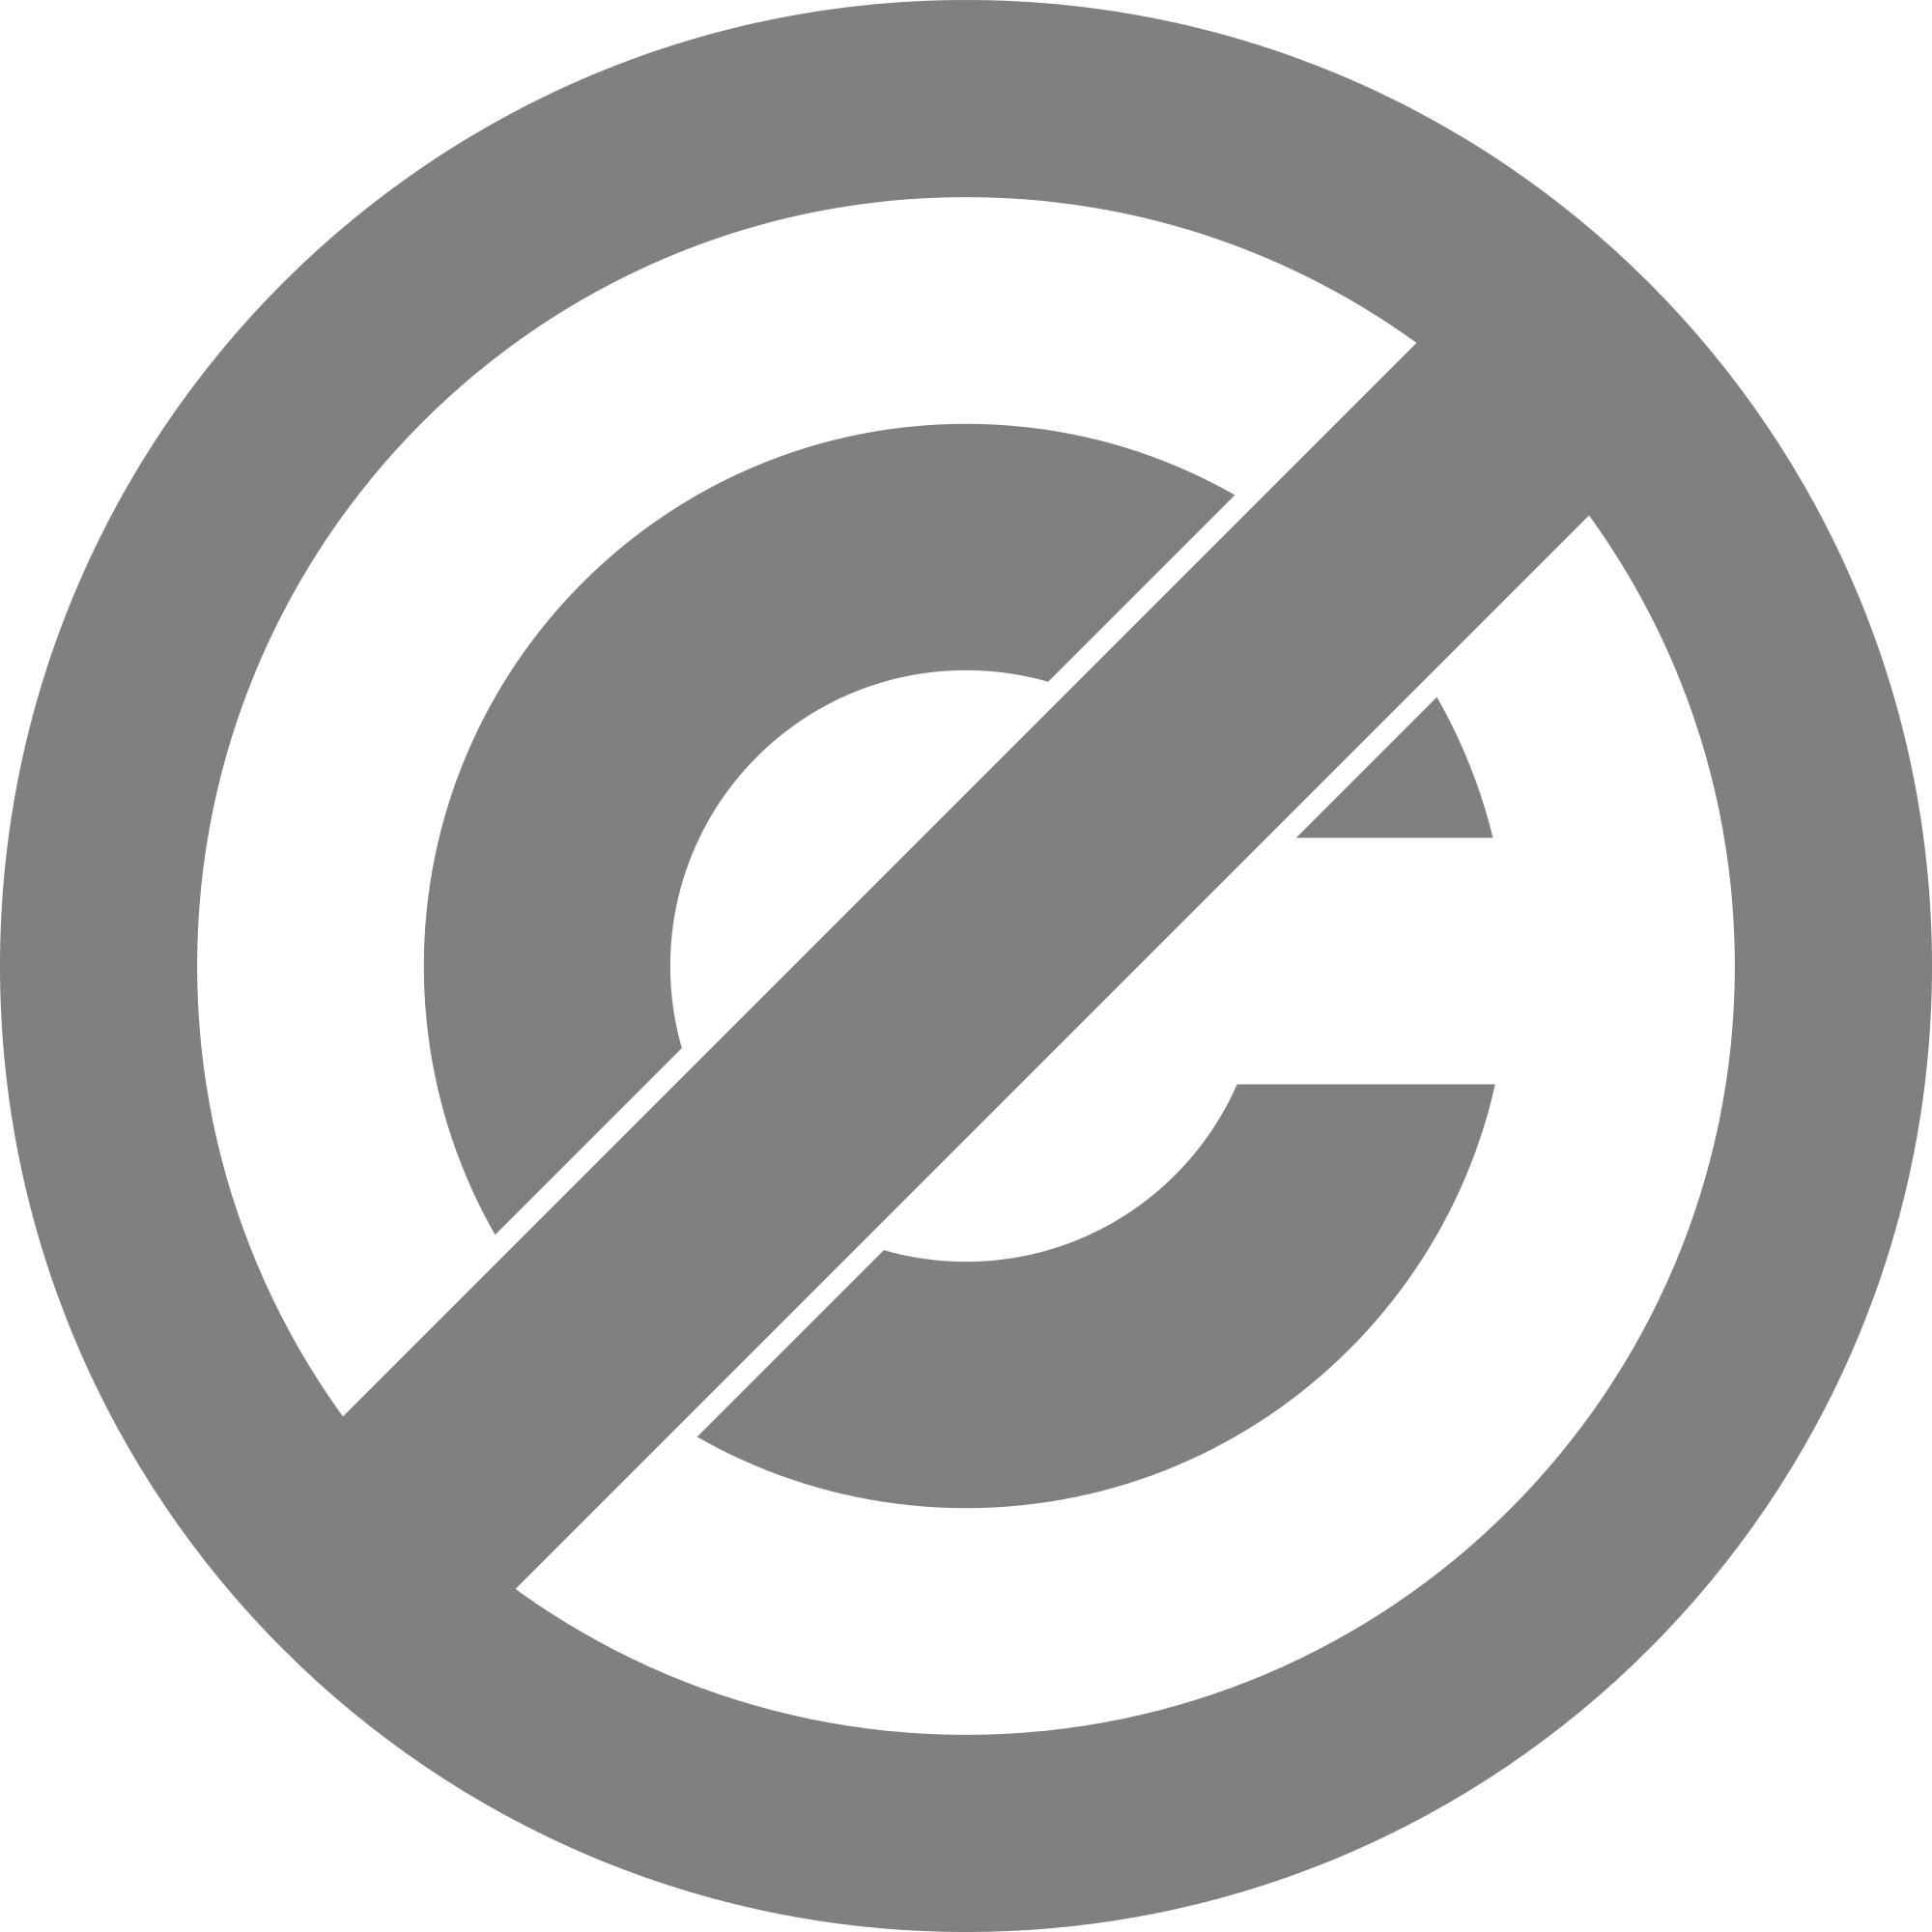 Crossed C Logo - Free-to-Use Resources - Copyright and Fair Use - LibGuides at Oregon ...